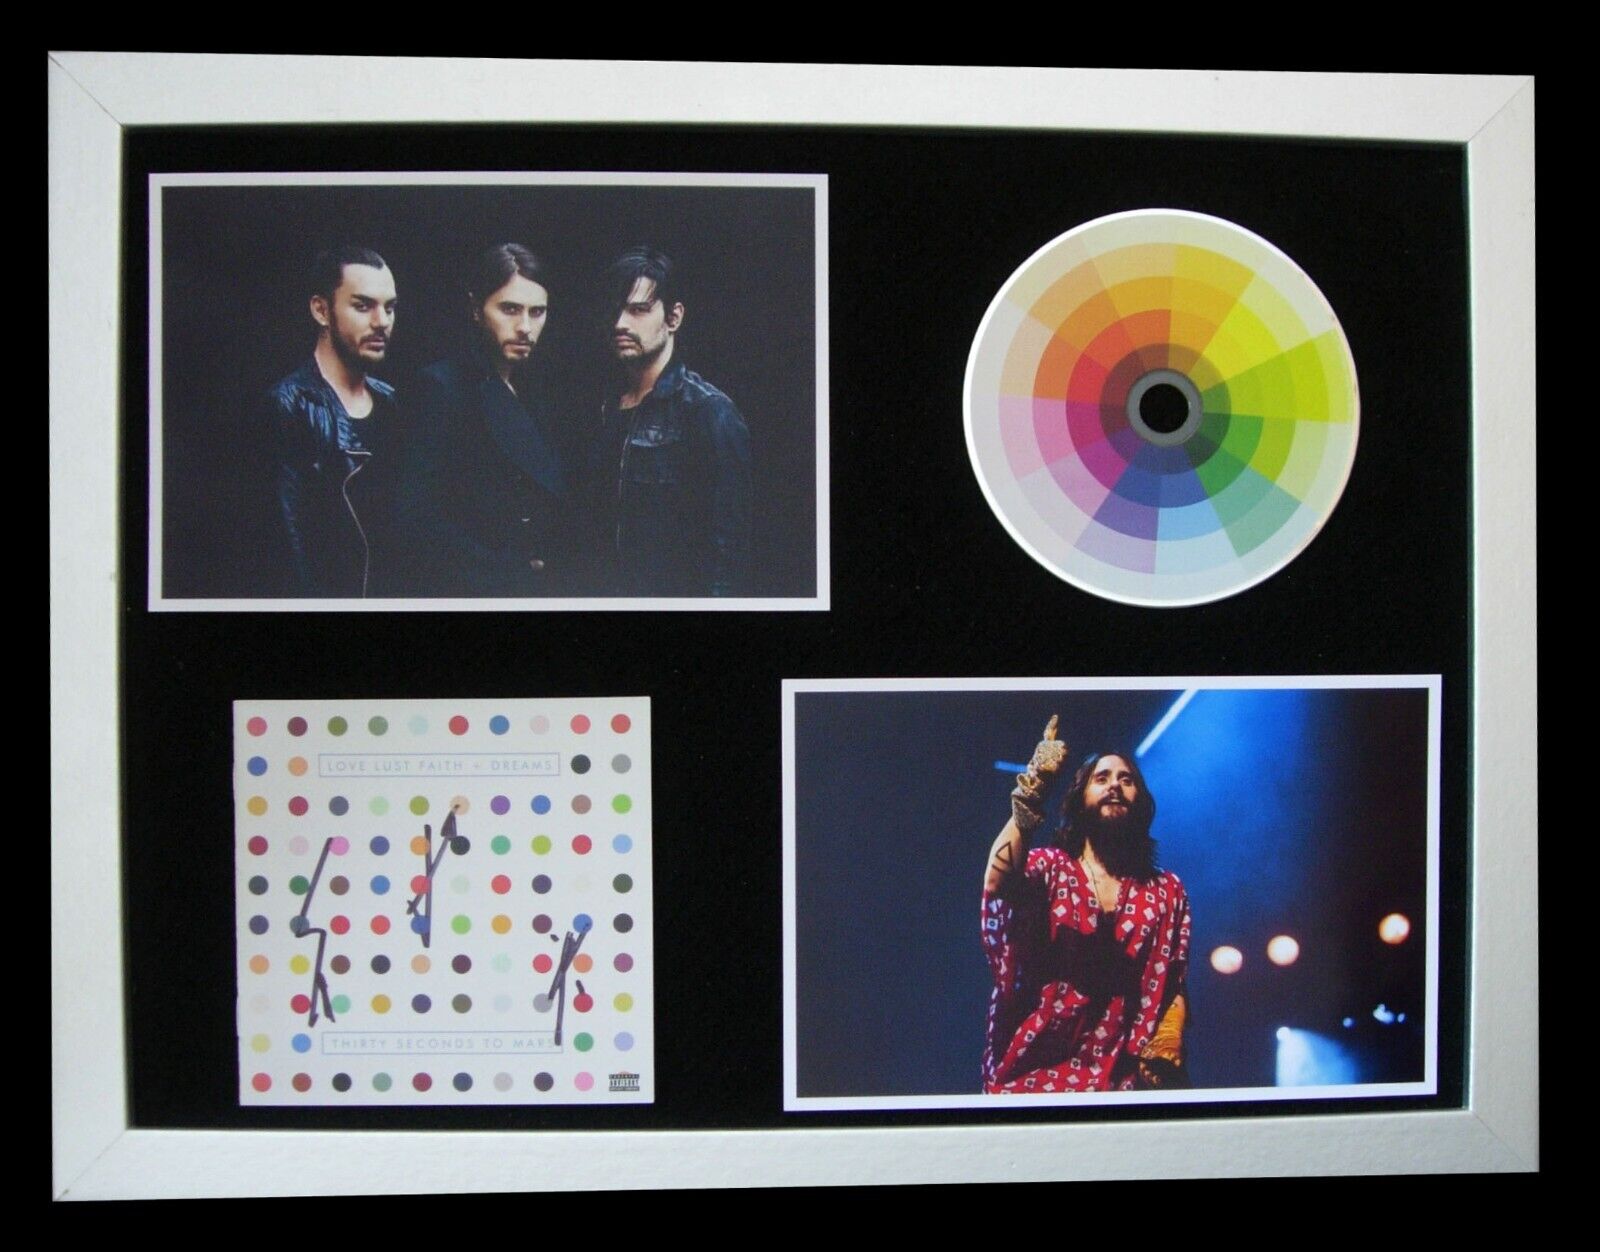 THIRTY SECONDS TO MARS+SIGNED+FRAMED+LOVE+DREAMS=100% GENUINE+FAST GLOBAL SHIP